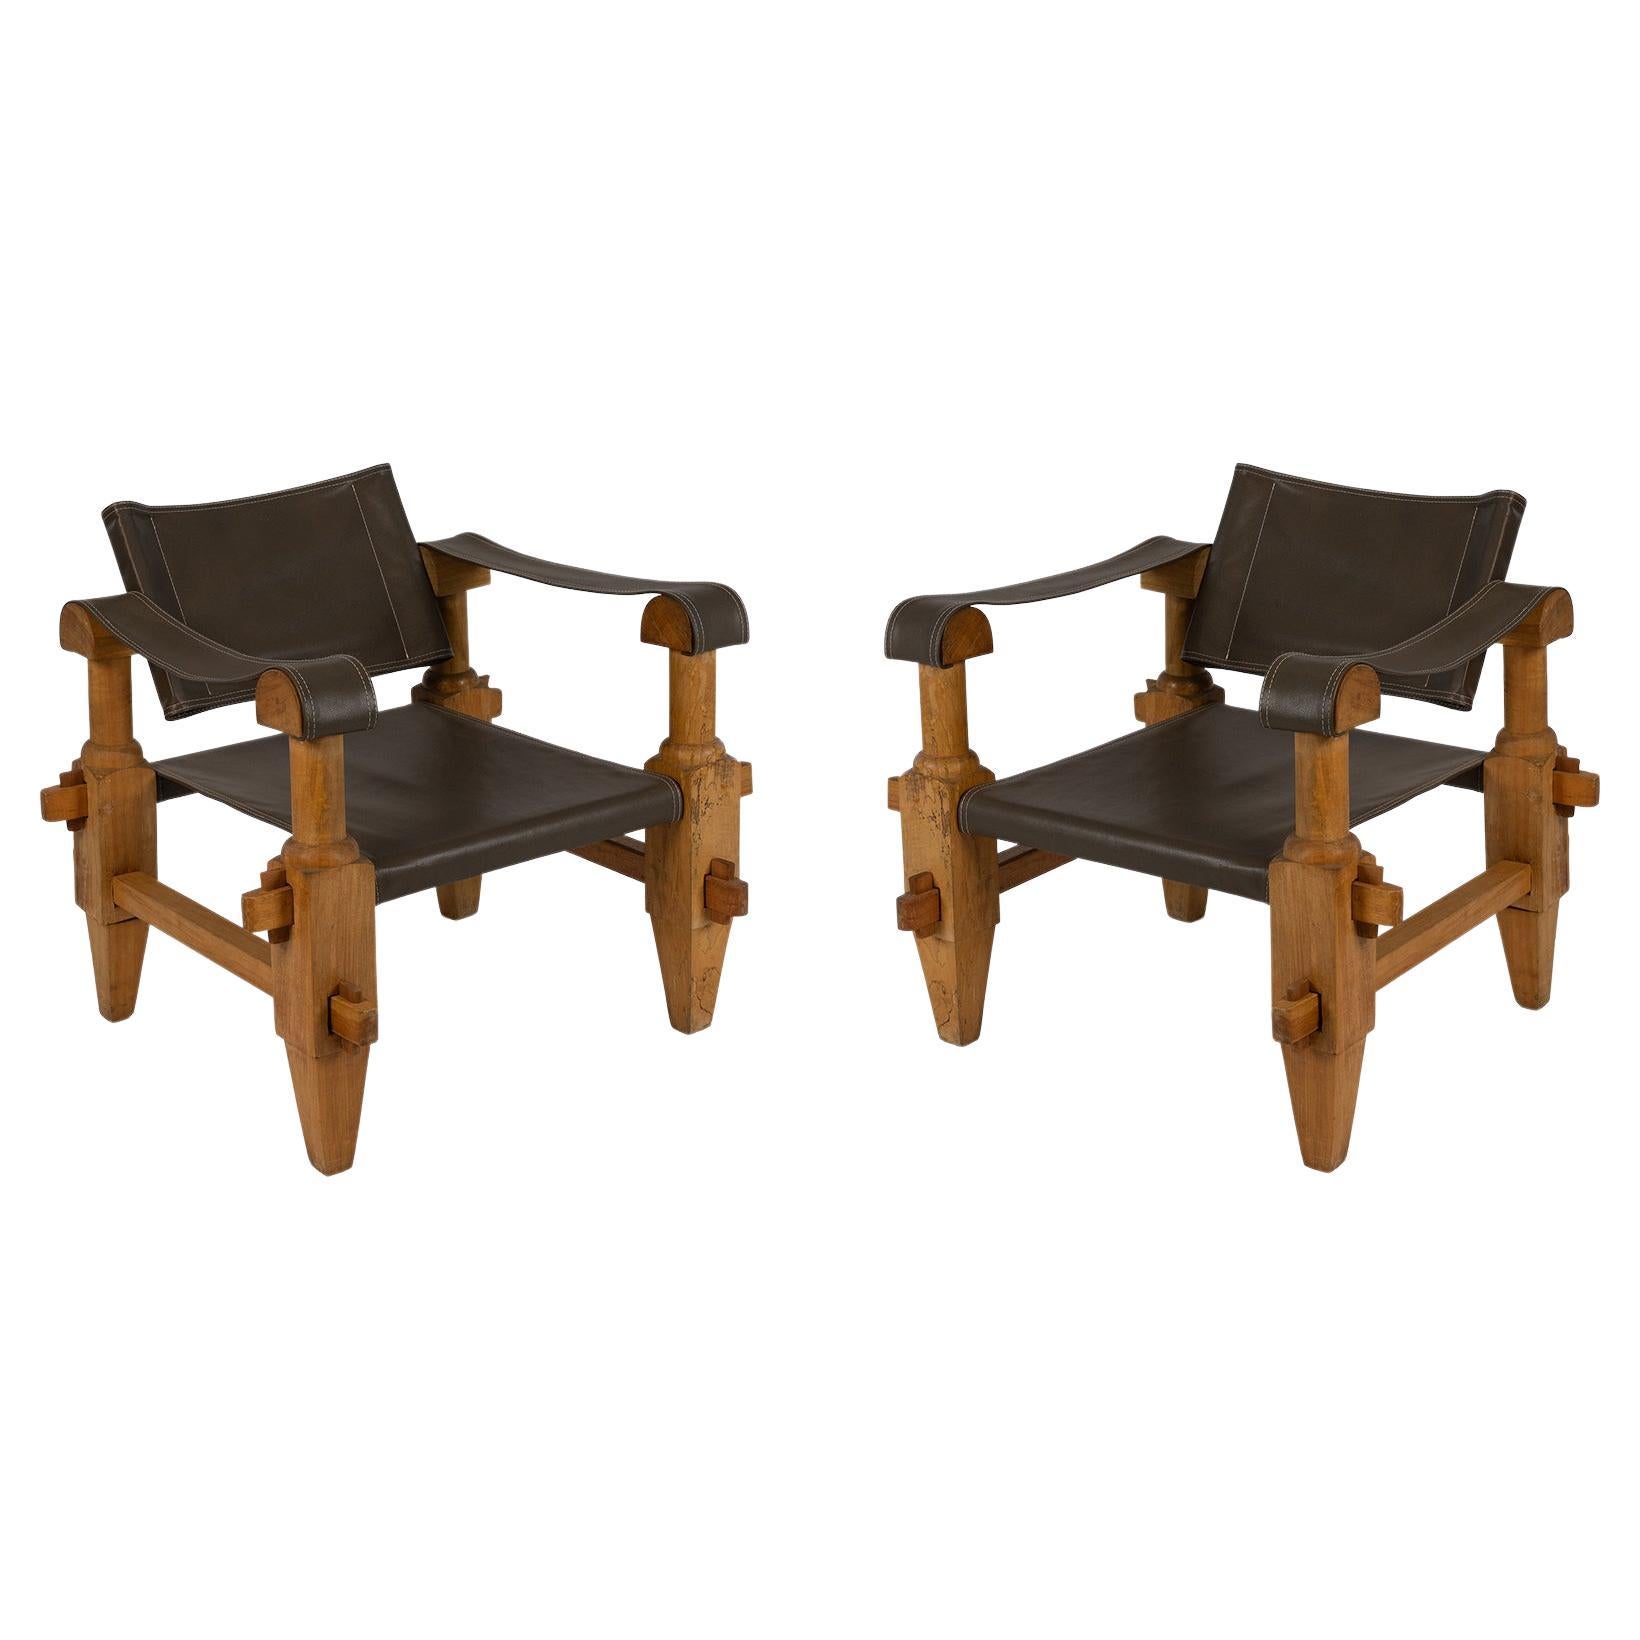 Mexico Olive Wood & Bull Leather Sling Chairs, 1970s